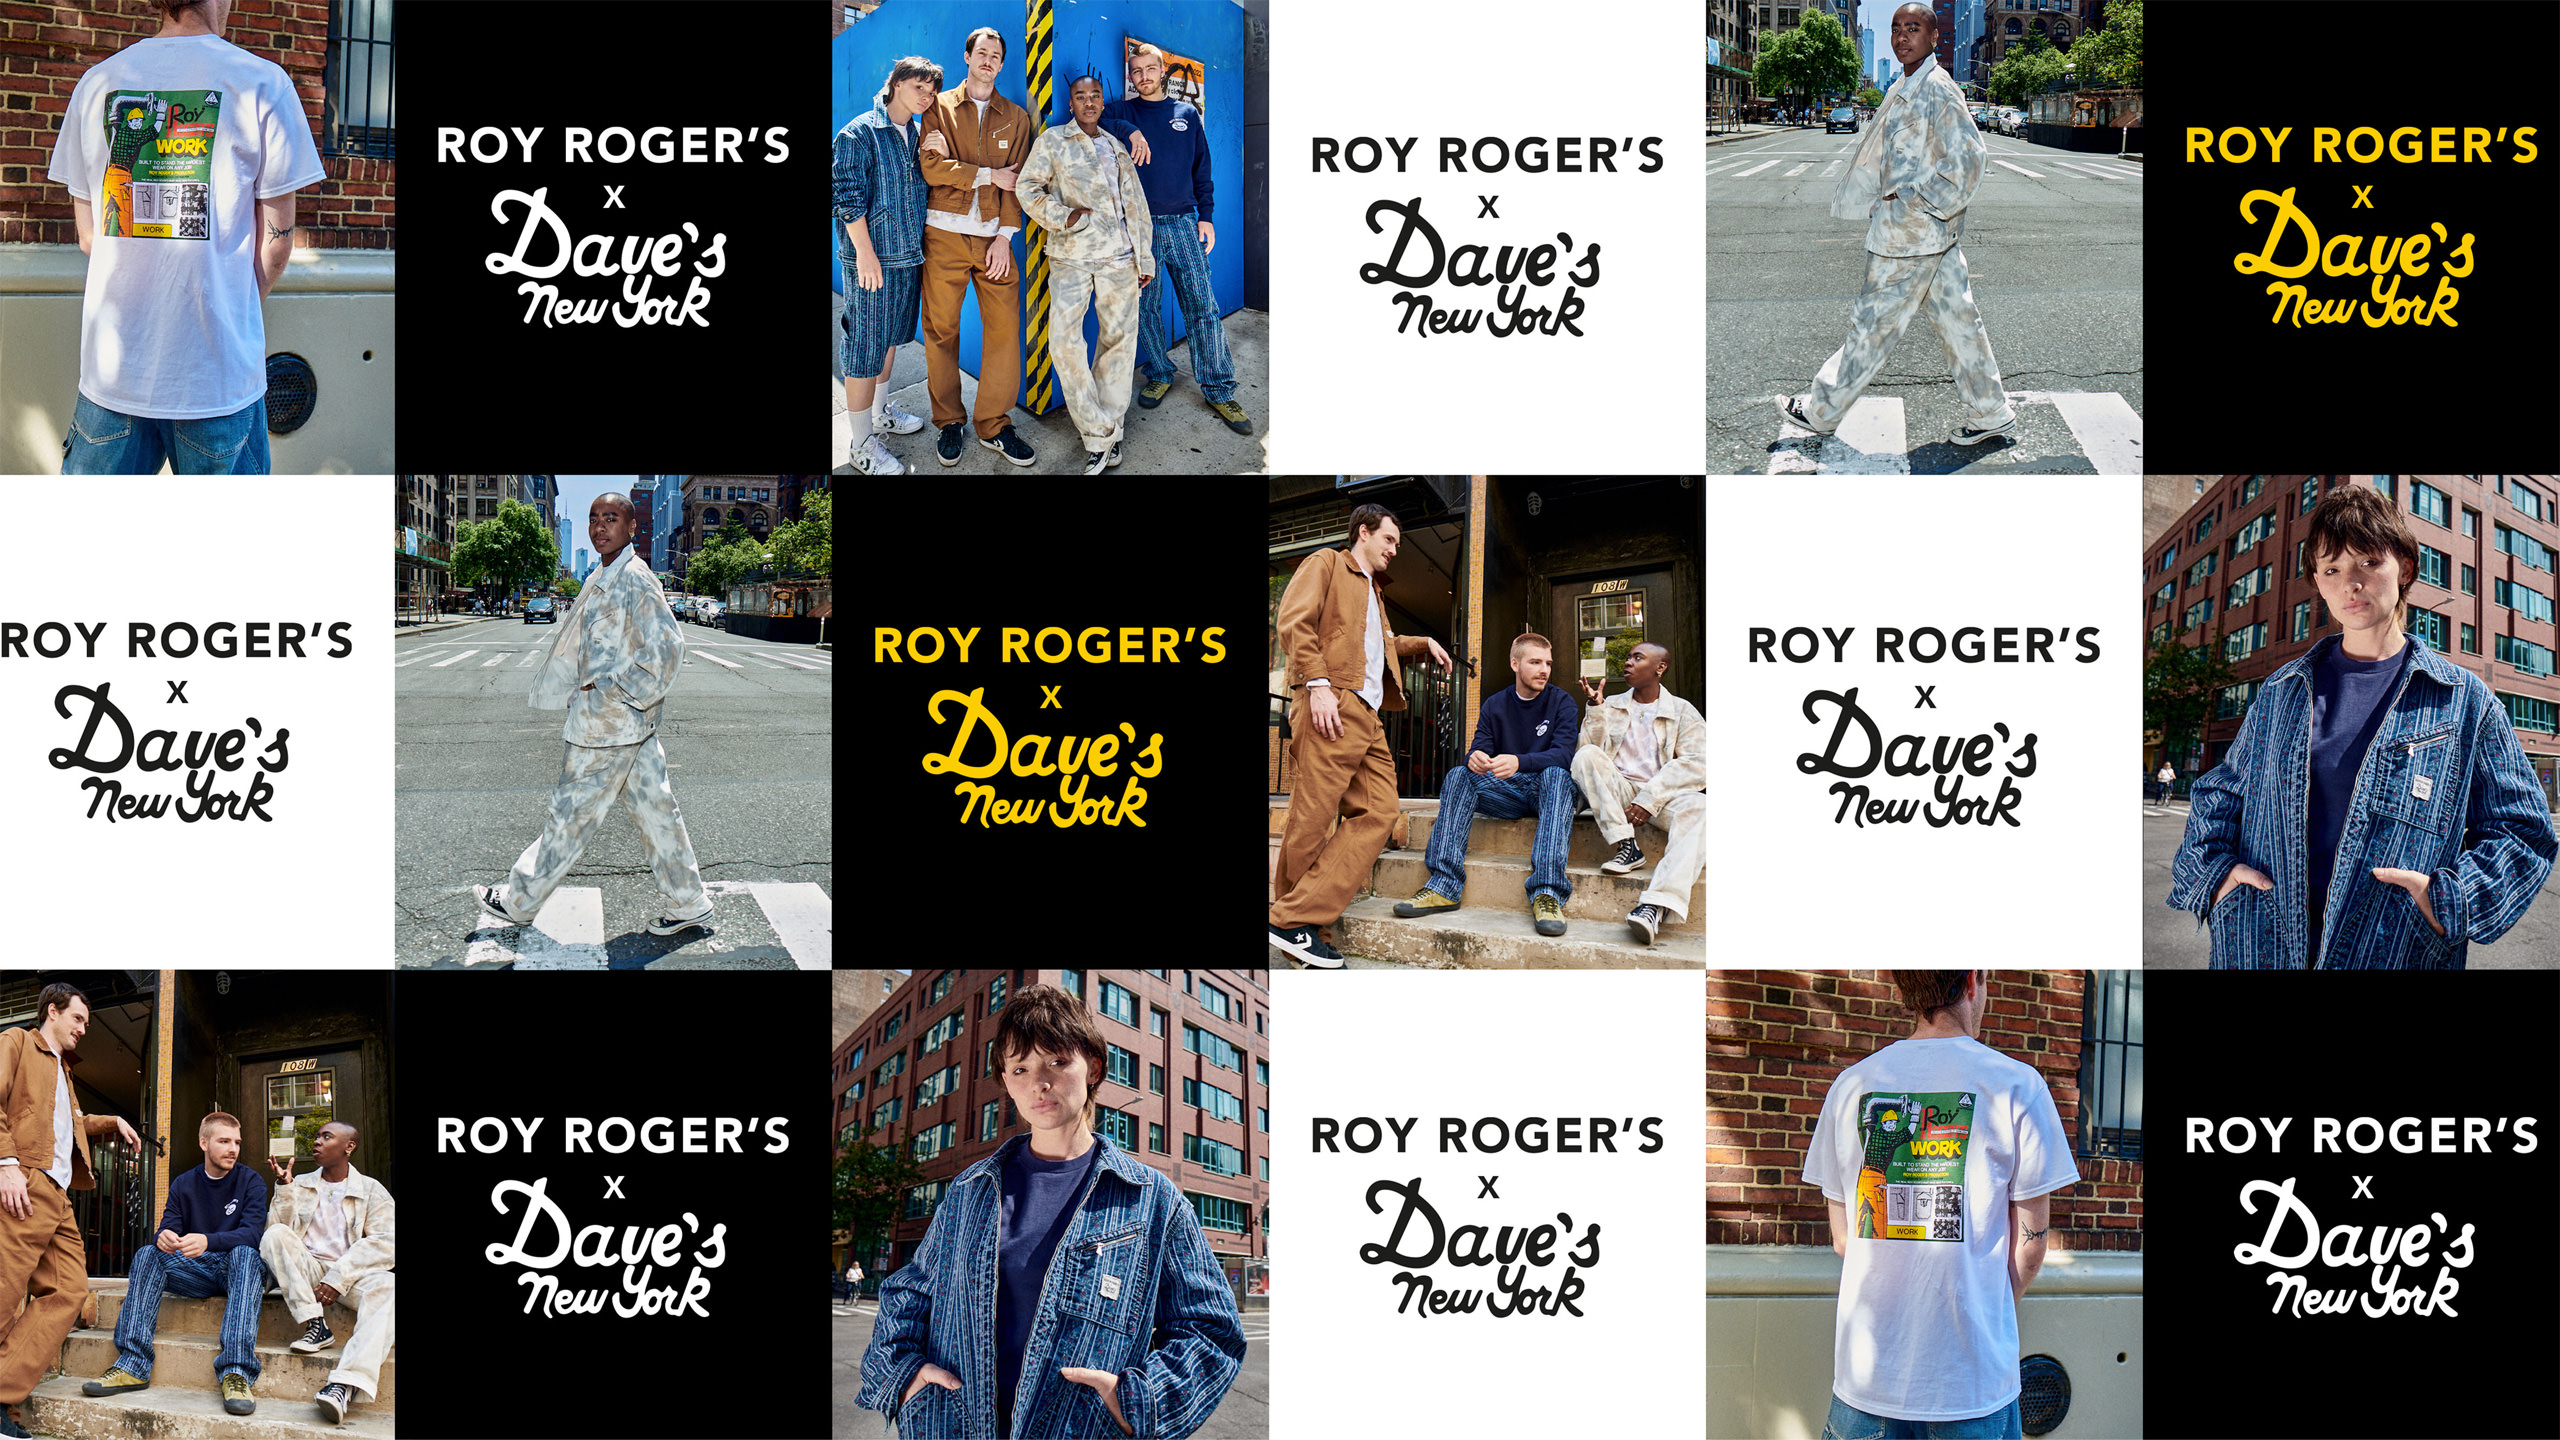 ROY ROGER'S_X_DAVE'S